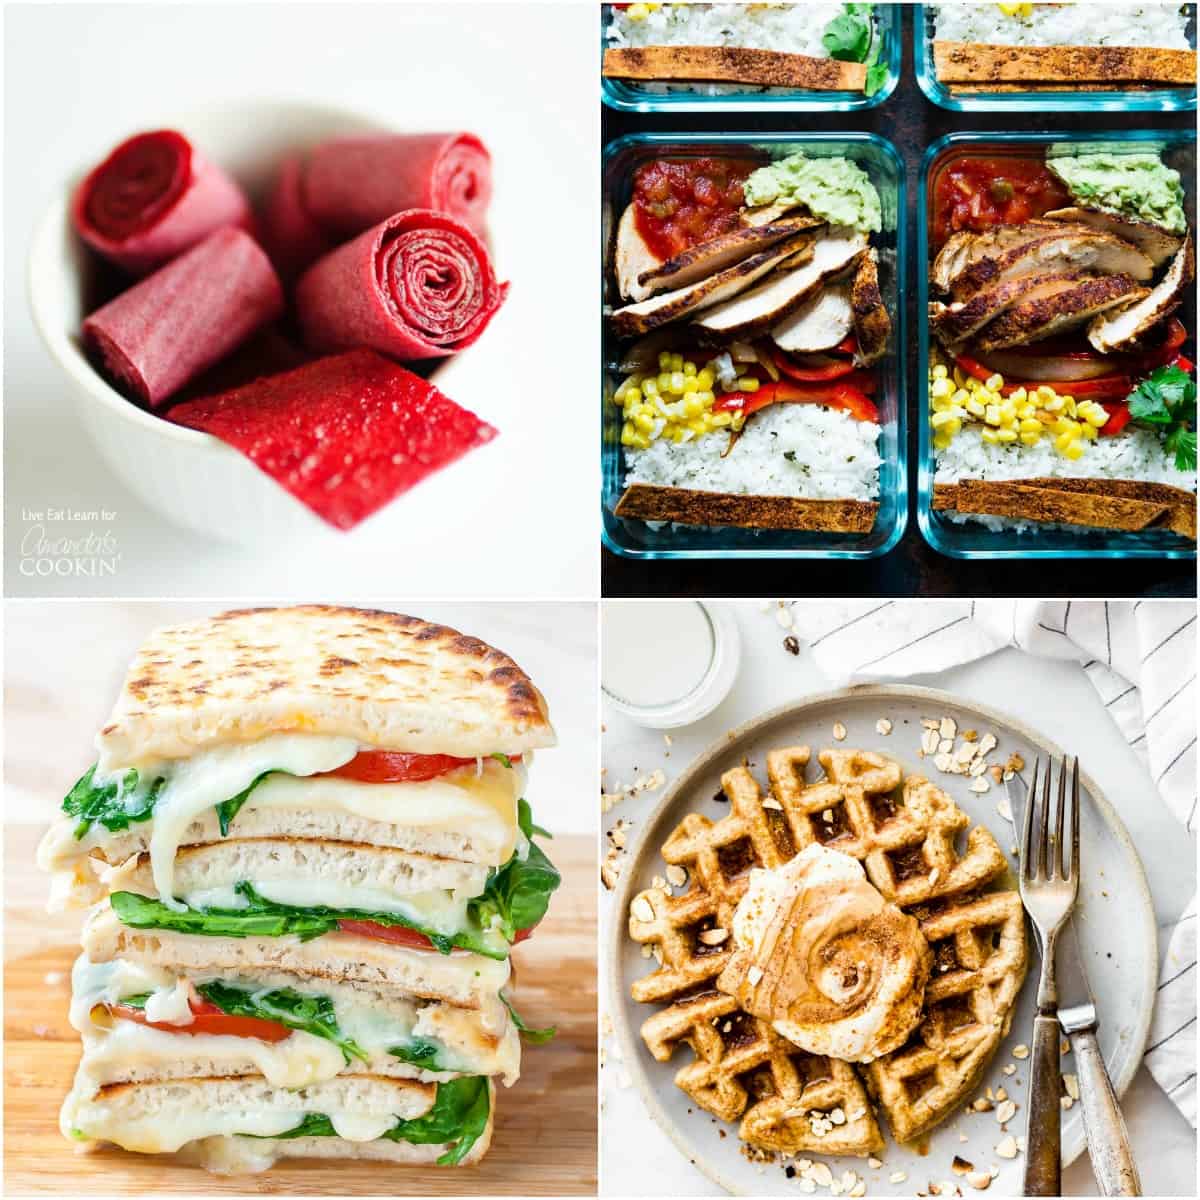 25 Best Back-to-School Recipes — Eat This Not That